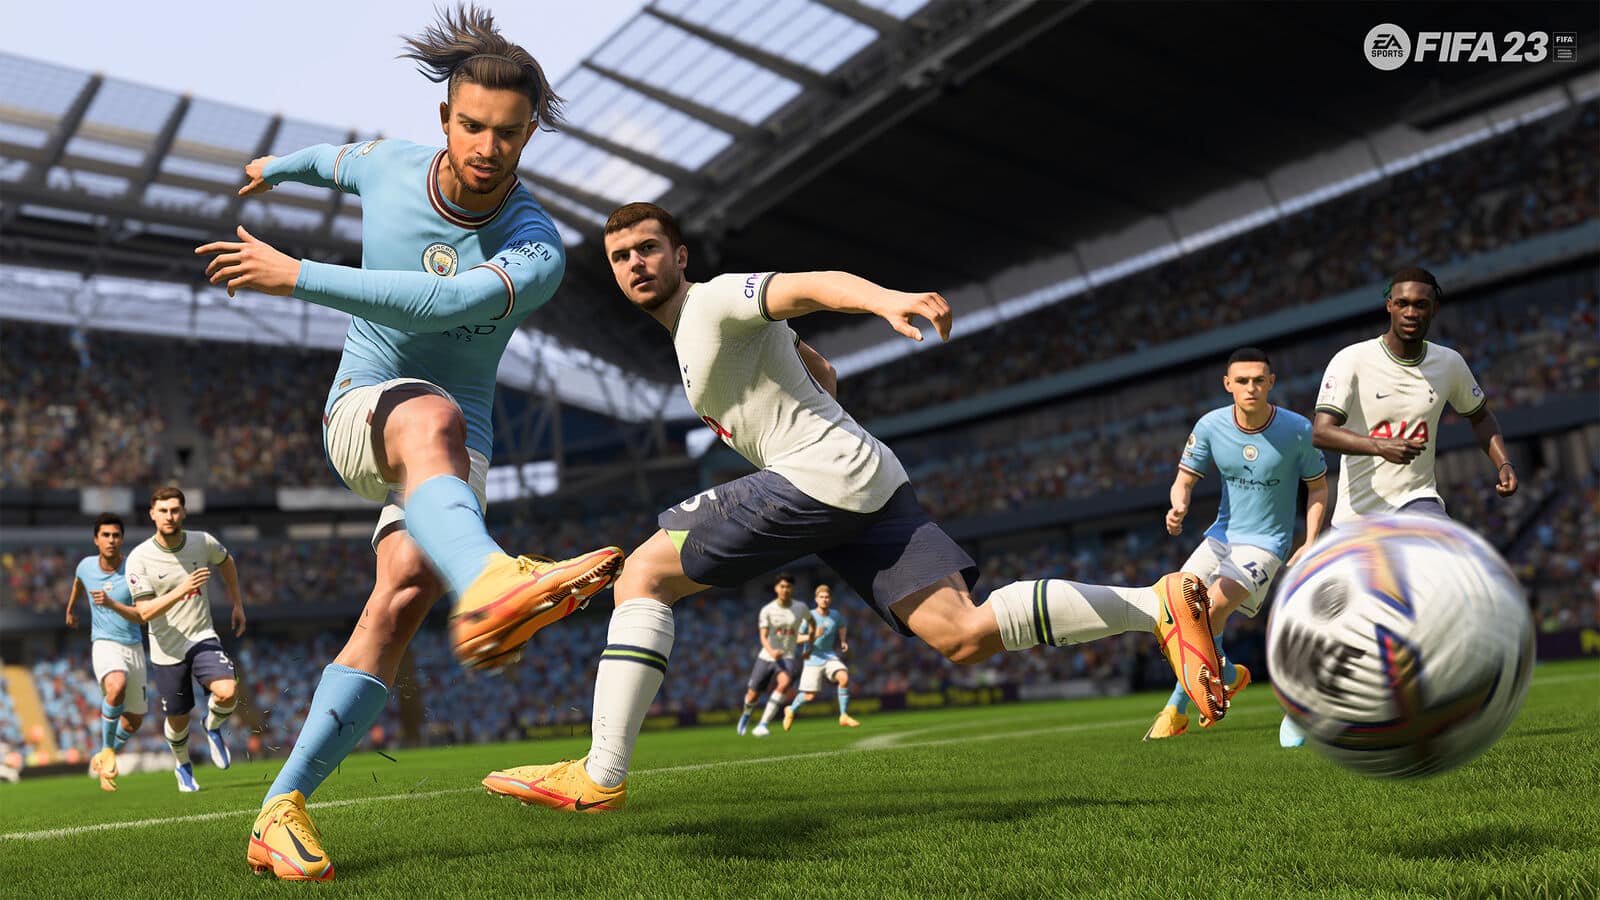 (Hypermotion is supposed to provide more realistic animations in Fifa 23.)